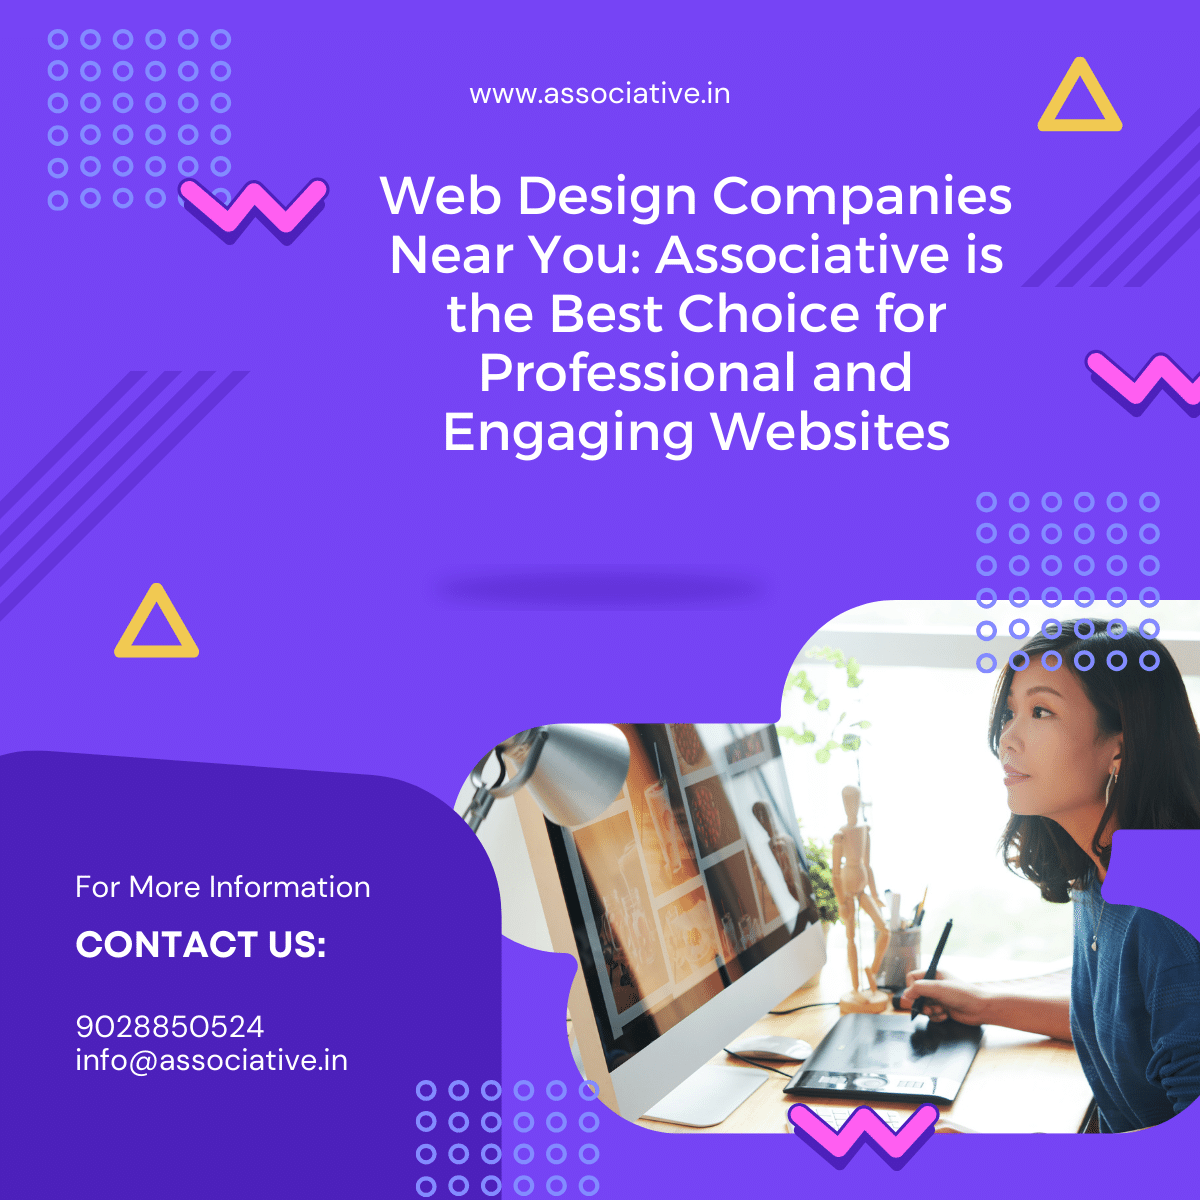 Web Design Companies: Best Choice for Professional and Engaging Websites